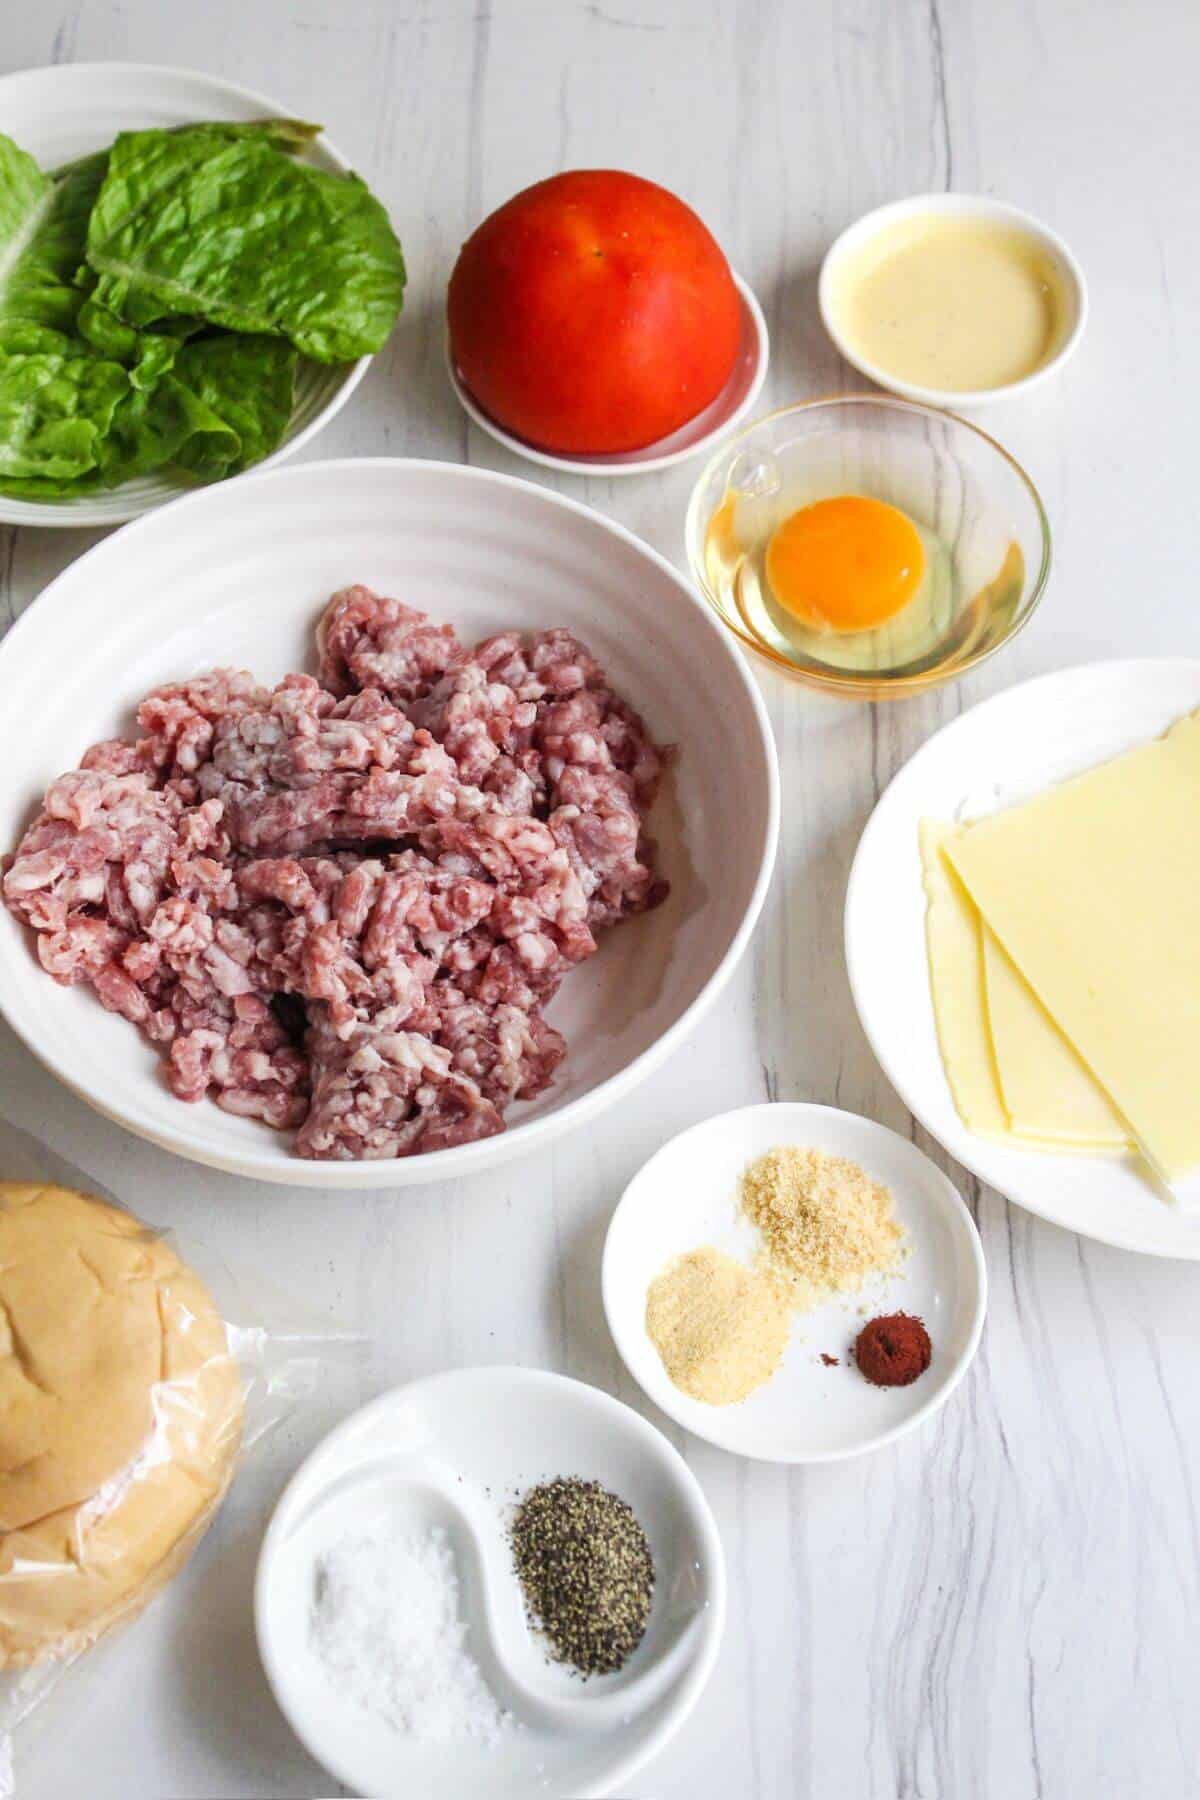 The ingredients for a pork burgers are laid out on a table.